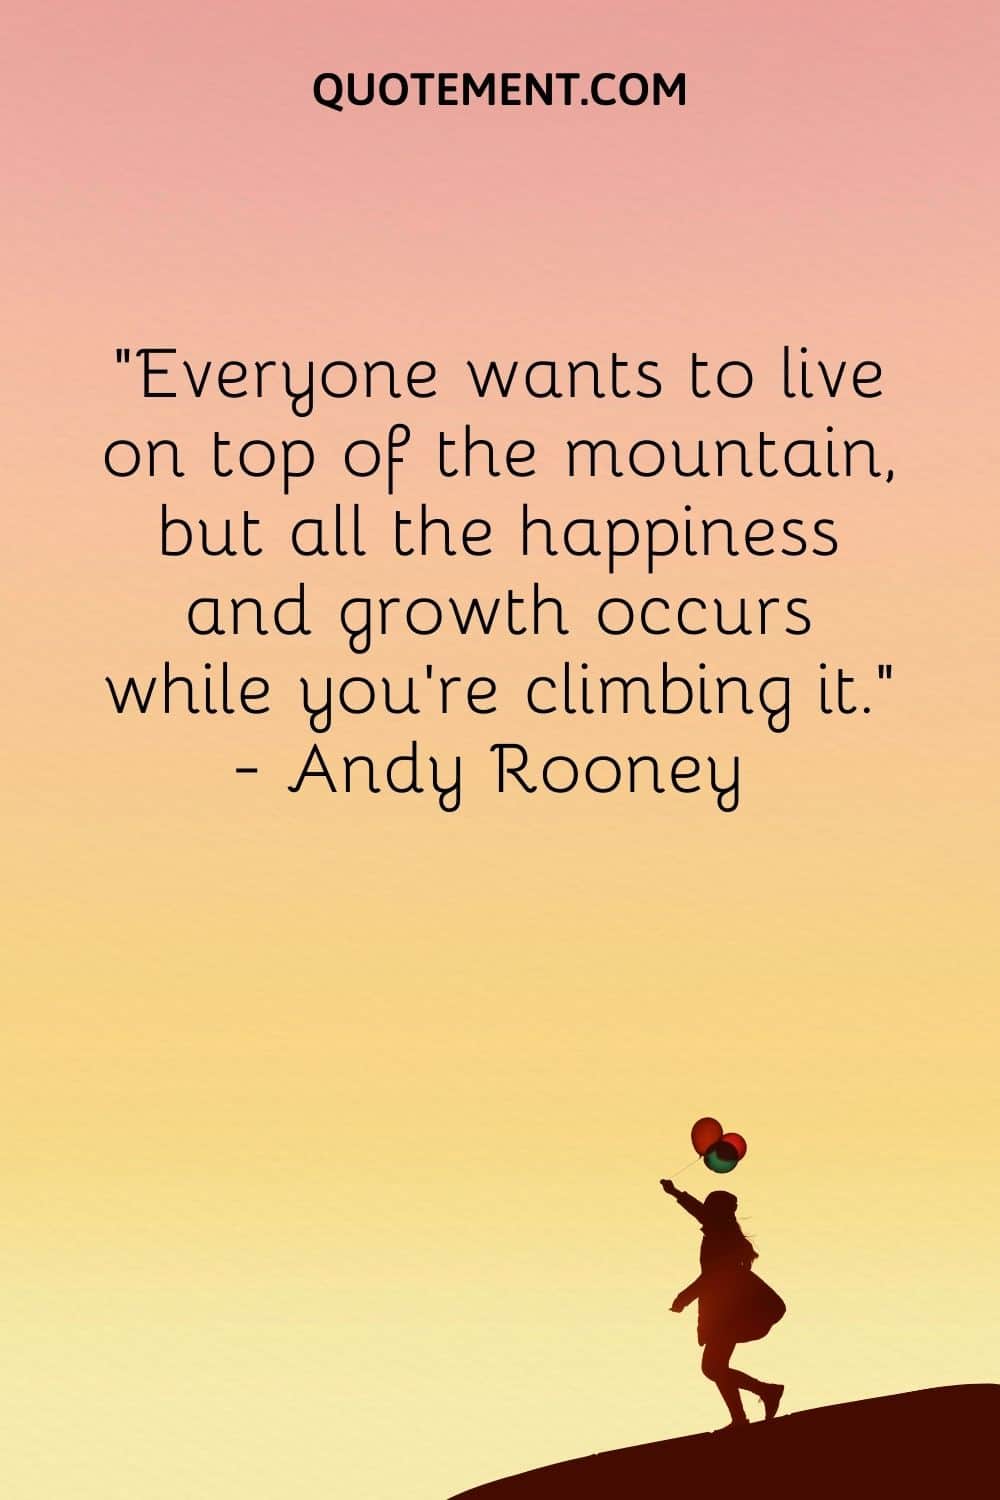 Everyone wants to live on top of the mountain, but all the happiness and growth occurs while you're climbing it